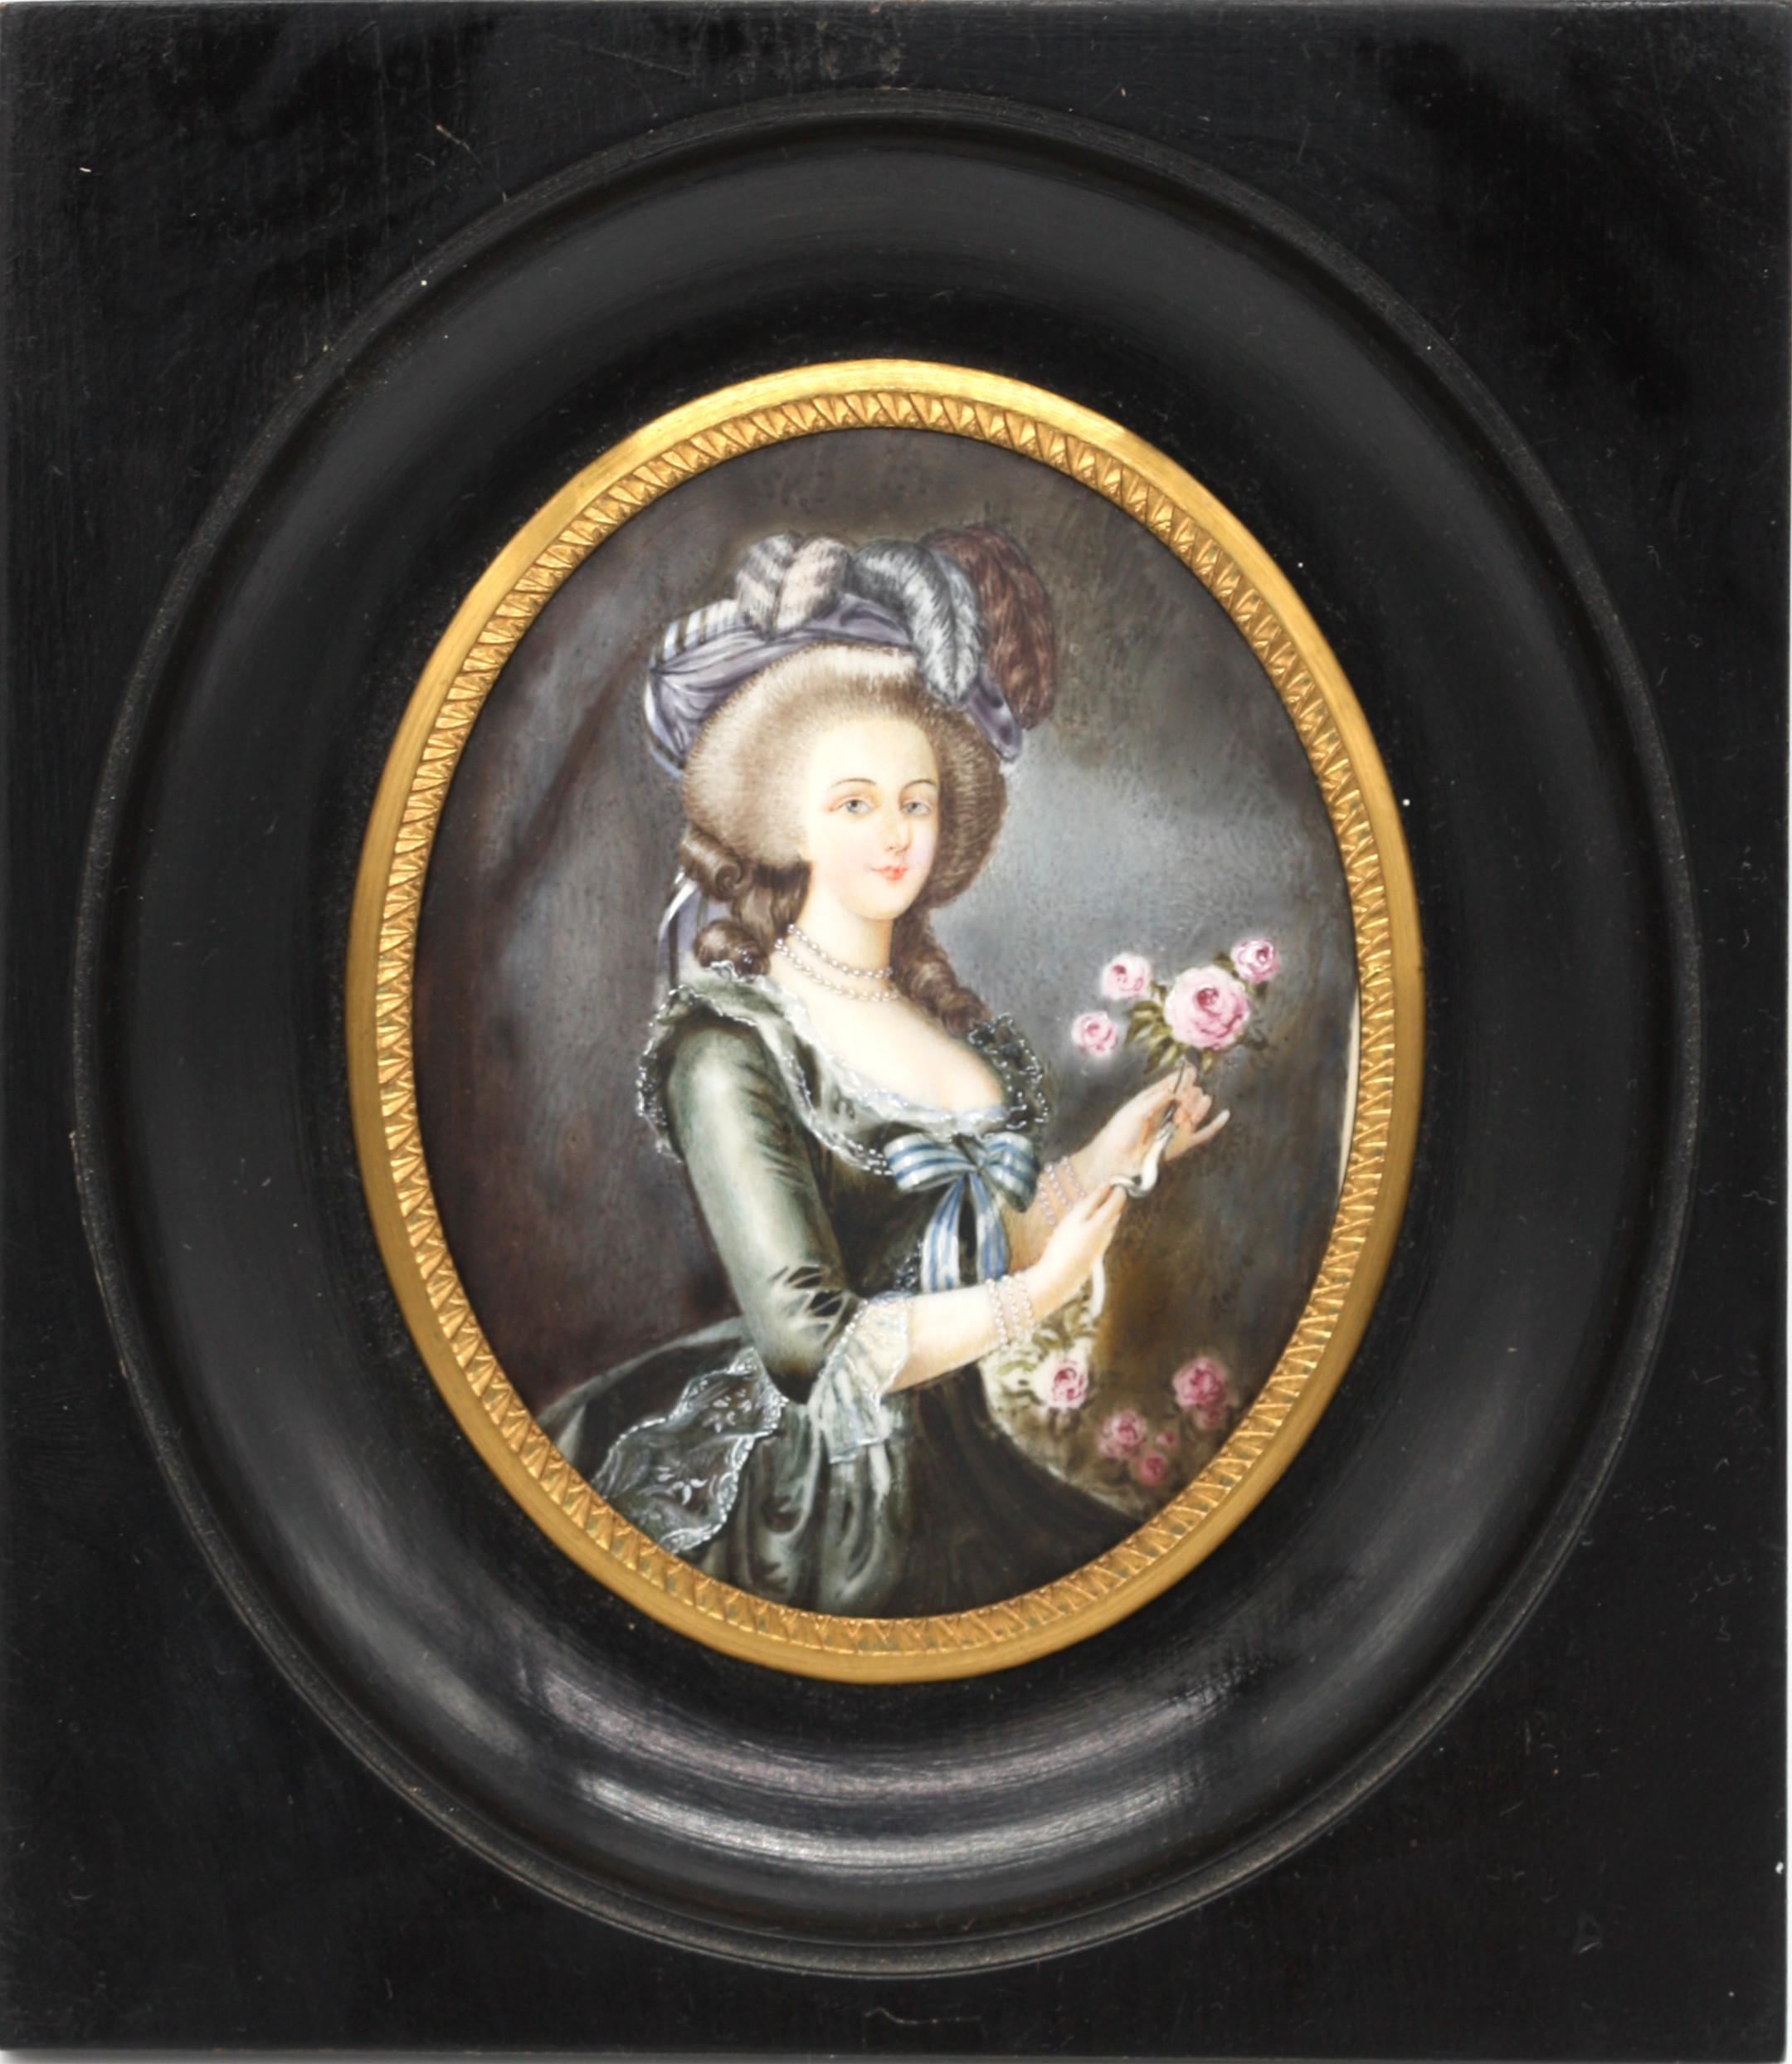 Miniature painting
European. Circa 1900. 
Marie Antoinette Painted by Andre, Signed. 
After the original by Charles Le Brun (1619-1690)
Measuring 3.75 by 3 in. (9.52 x 7.62 cm.).